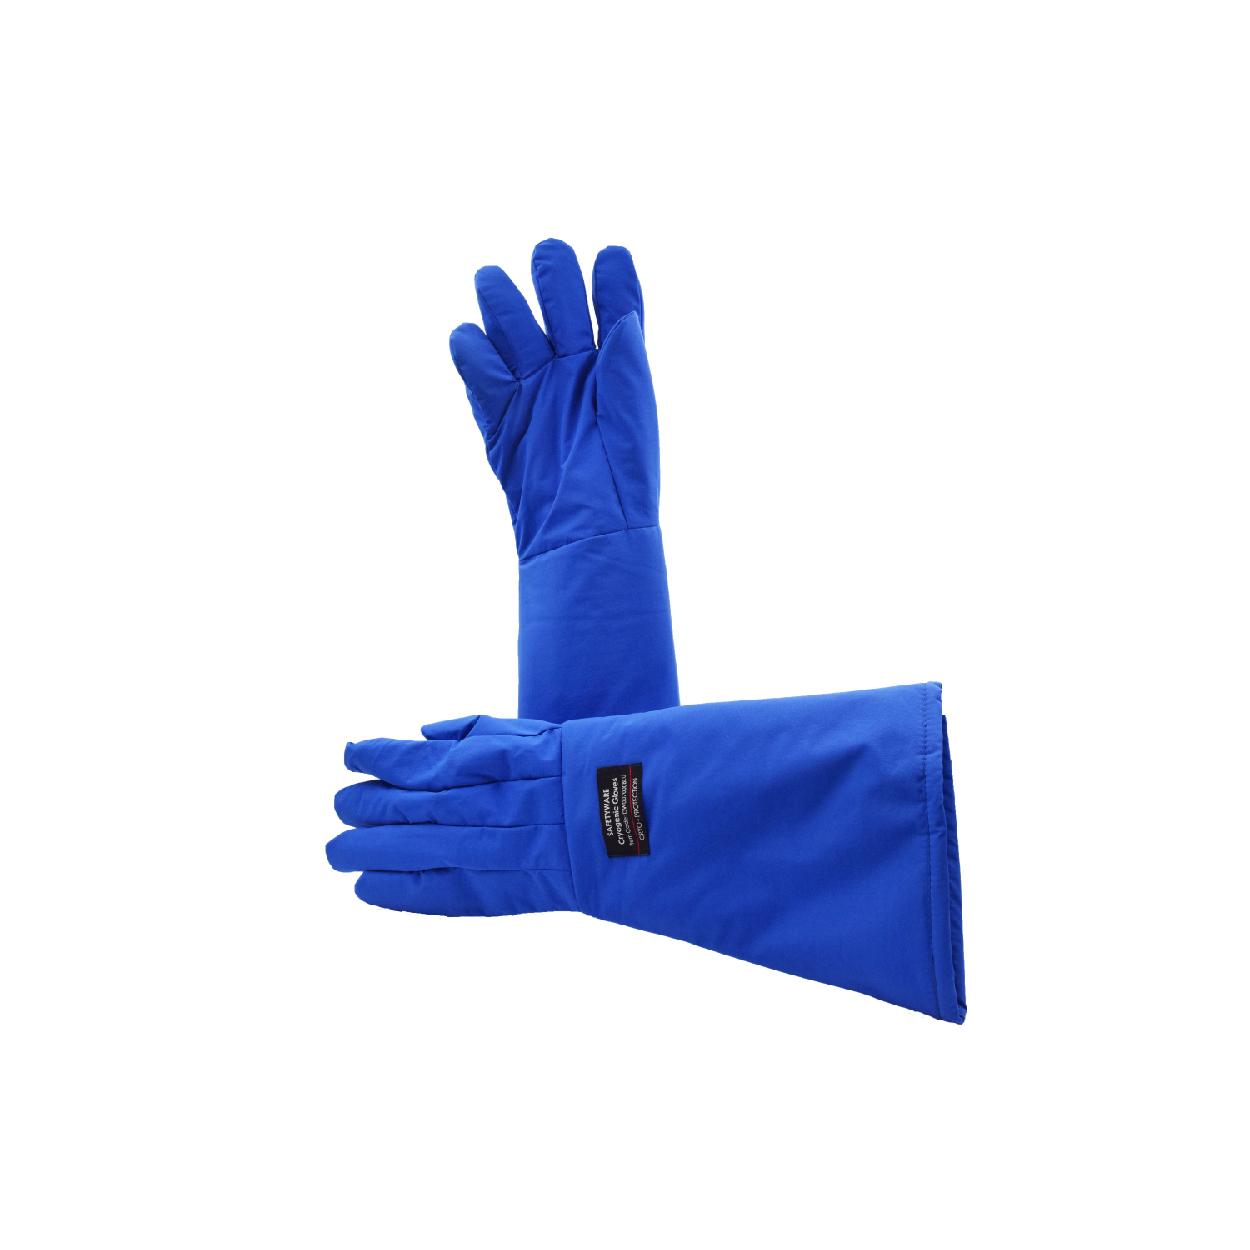 SAFETYWARE Cryogenic Gloves 48cm